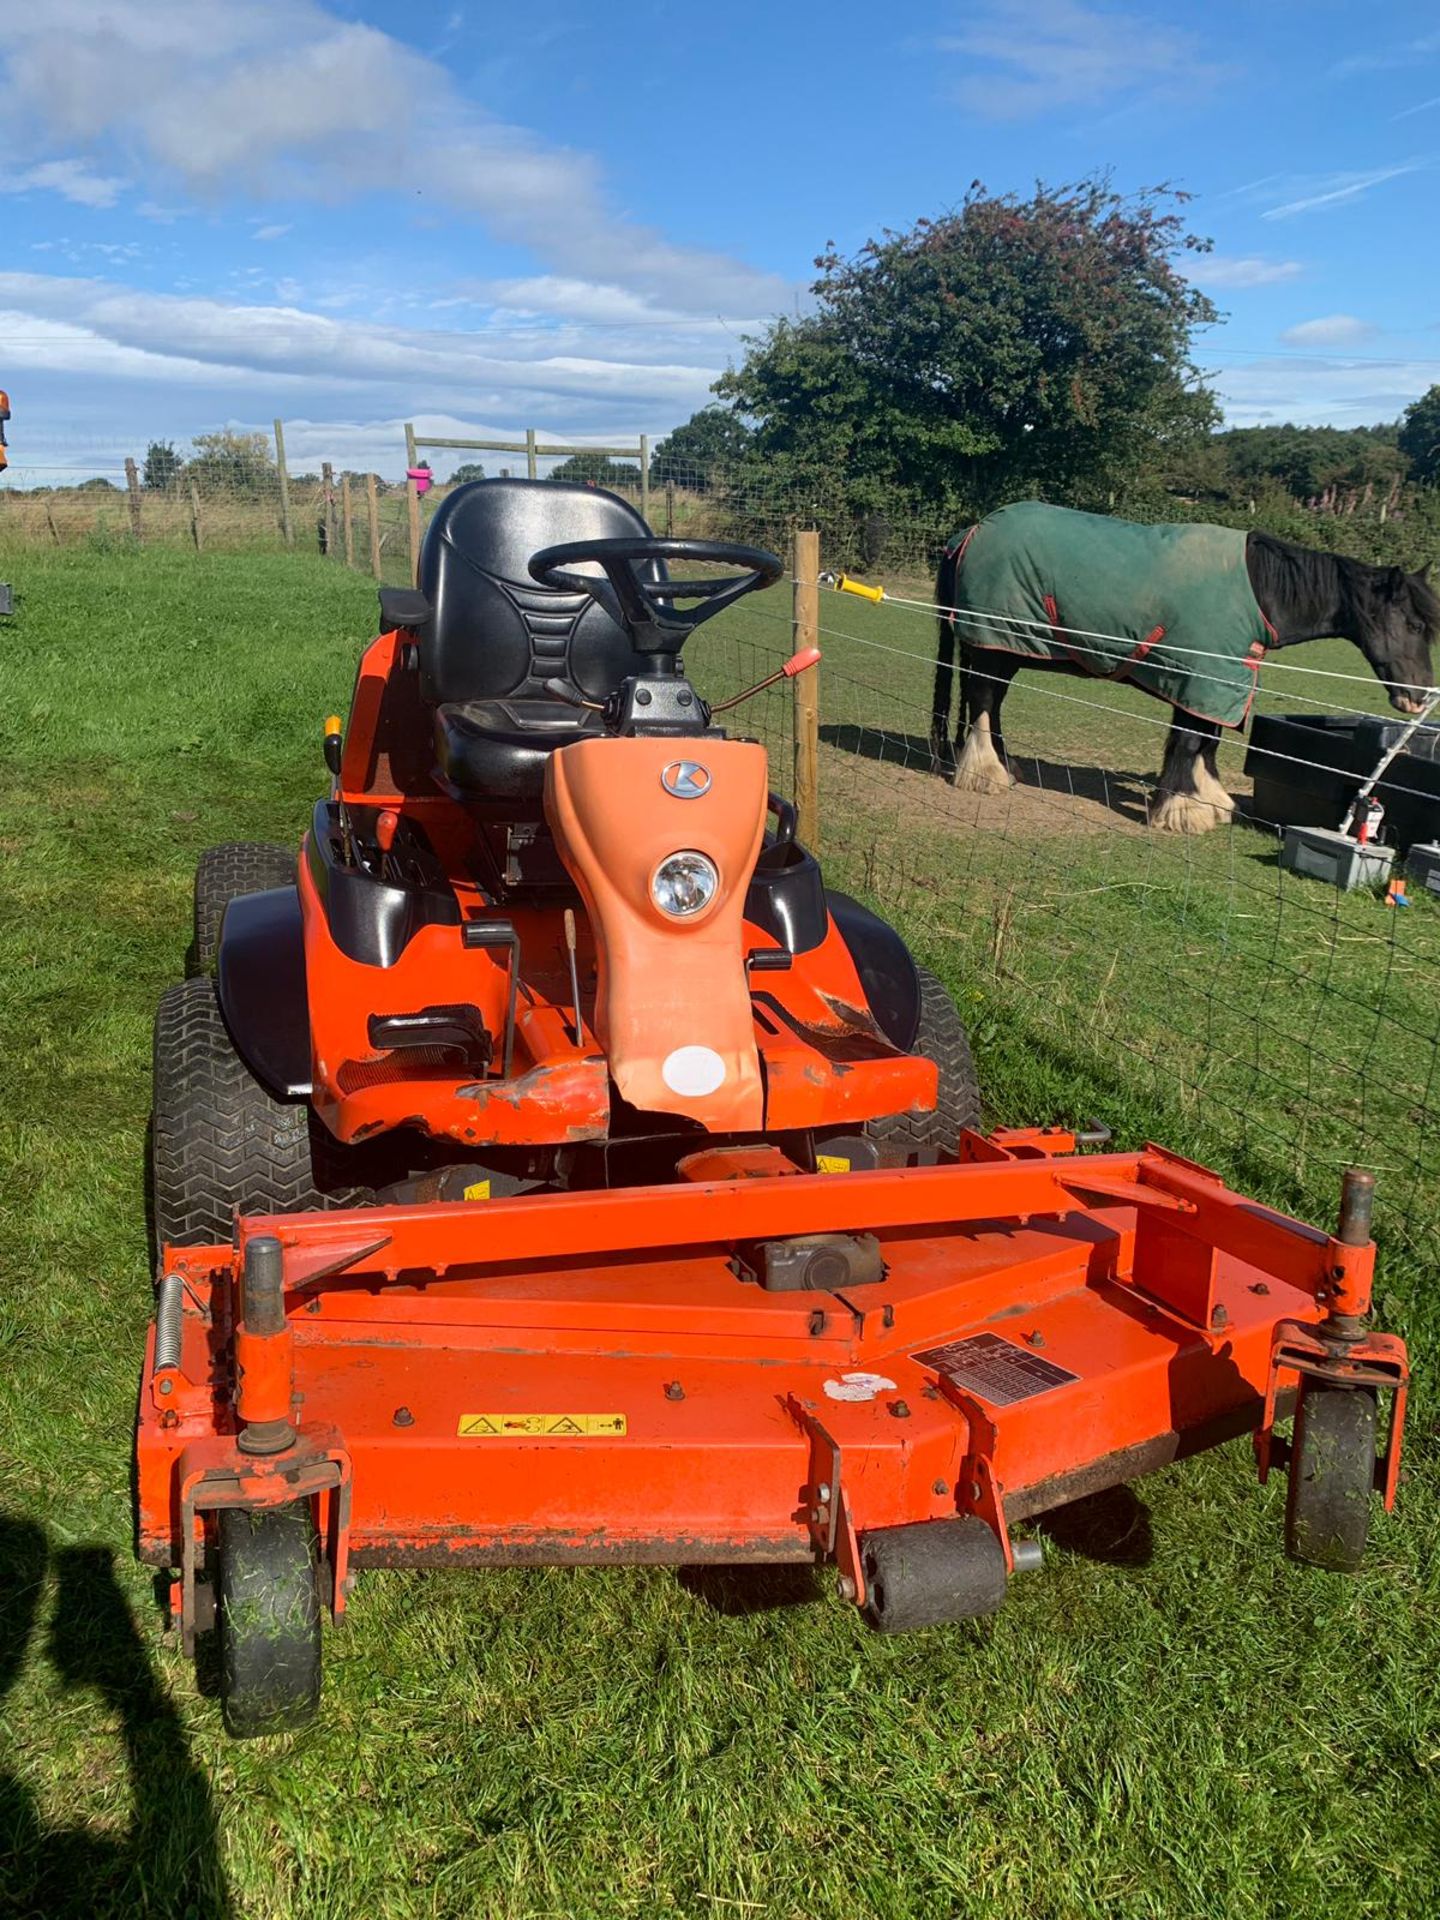 2012 KUBOTA F3680 OUT FRONT 4WD HST MOWER, TURF TYRES, 35 HP DIESEL ENGINE *PLUS VAT* - Image 3 of 15